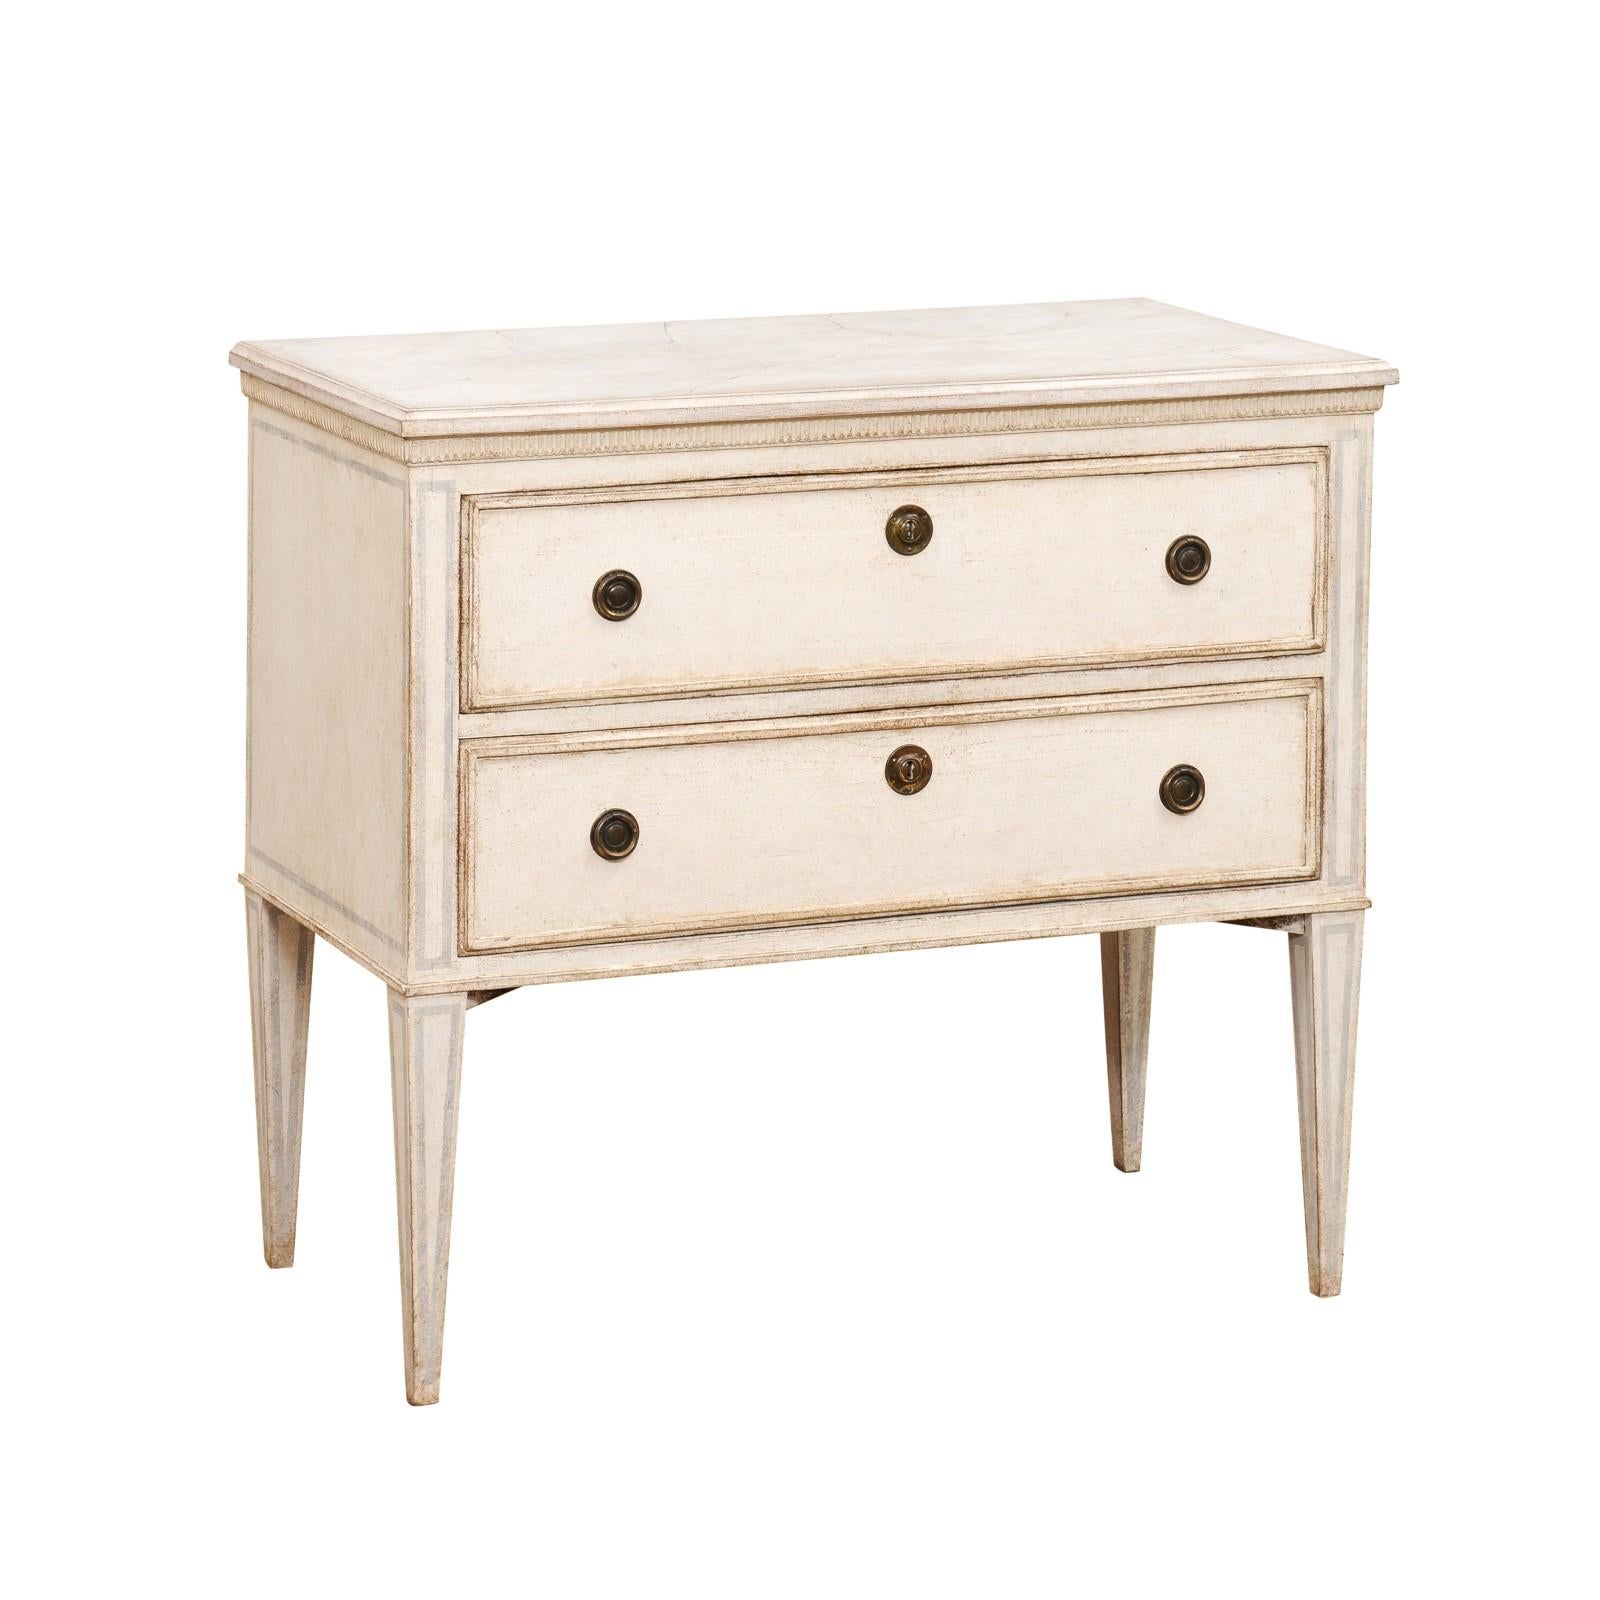 A Swedish Gustavian style painted chest circa 1890 with two drawers, carved fluted molding, light grey painted outlines and tapered legs. Embrace the enduring charm of Nordic design with this Swedish Gustavian style painted chest, circa 1890. This